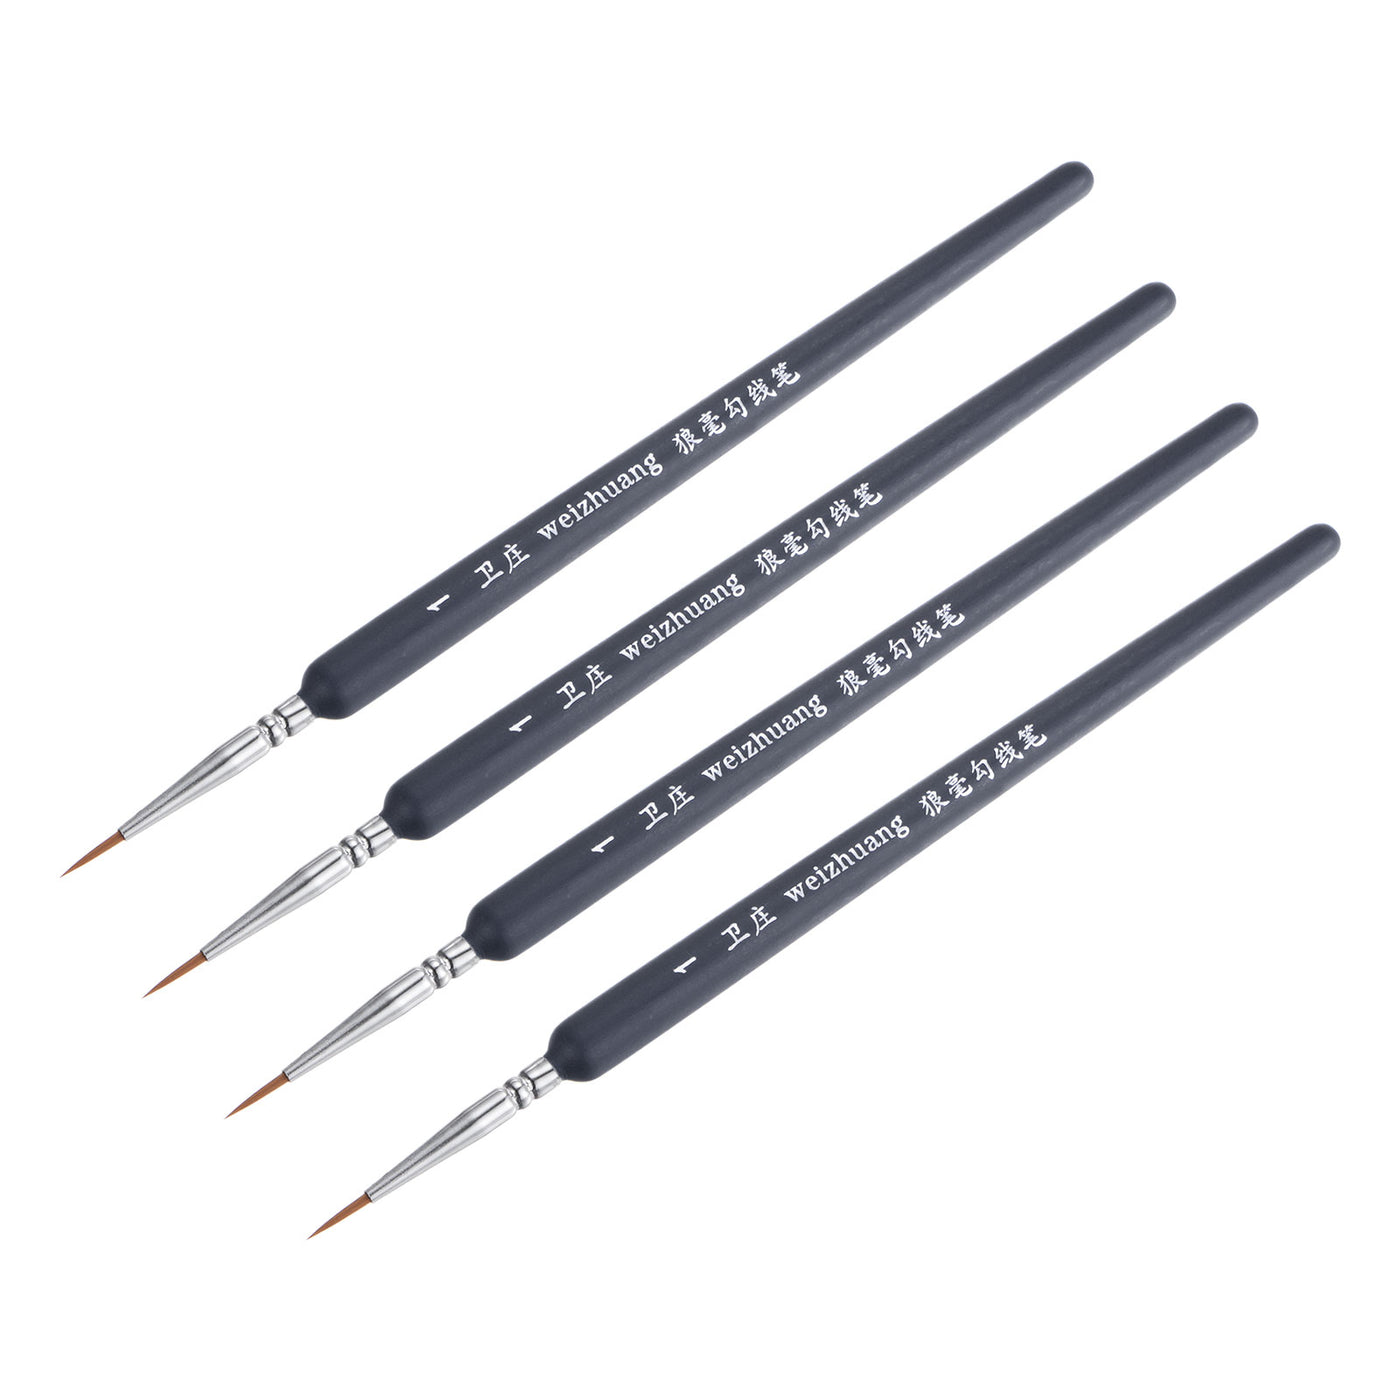 uxcell Uxcell Detailing Paint Brush 0.39" Bristle Length with Dark Blue Wood Handle 4Pcs